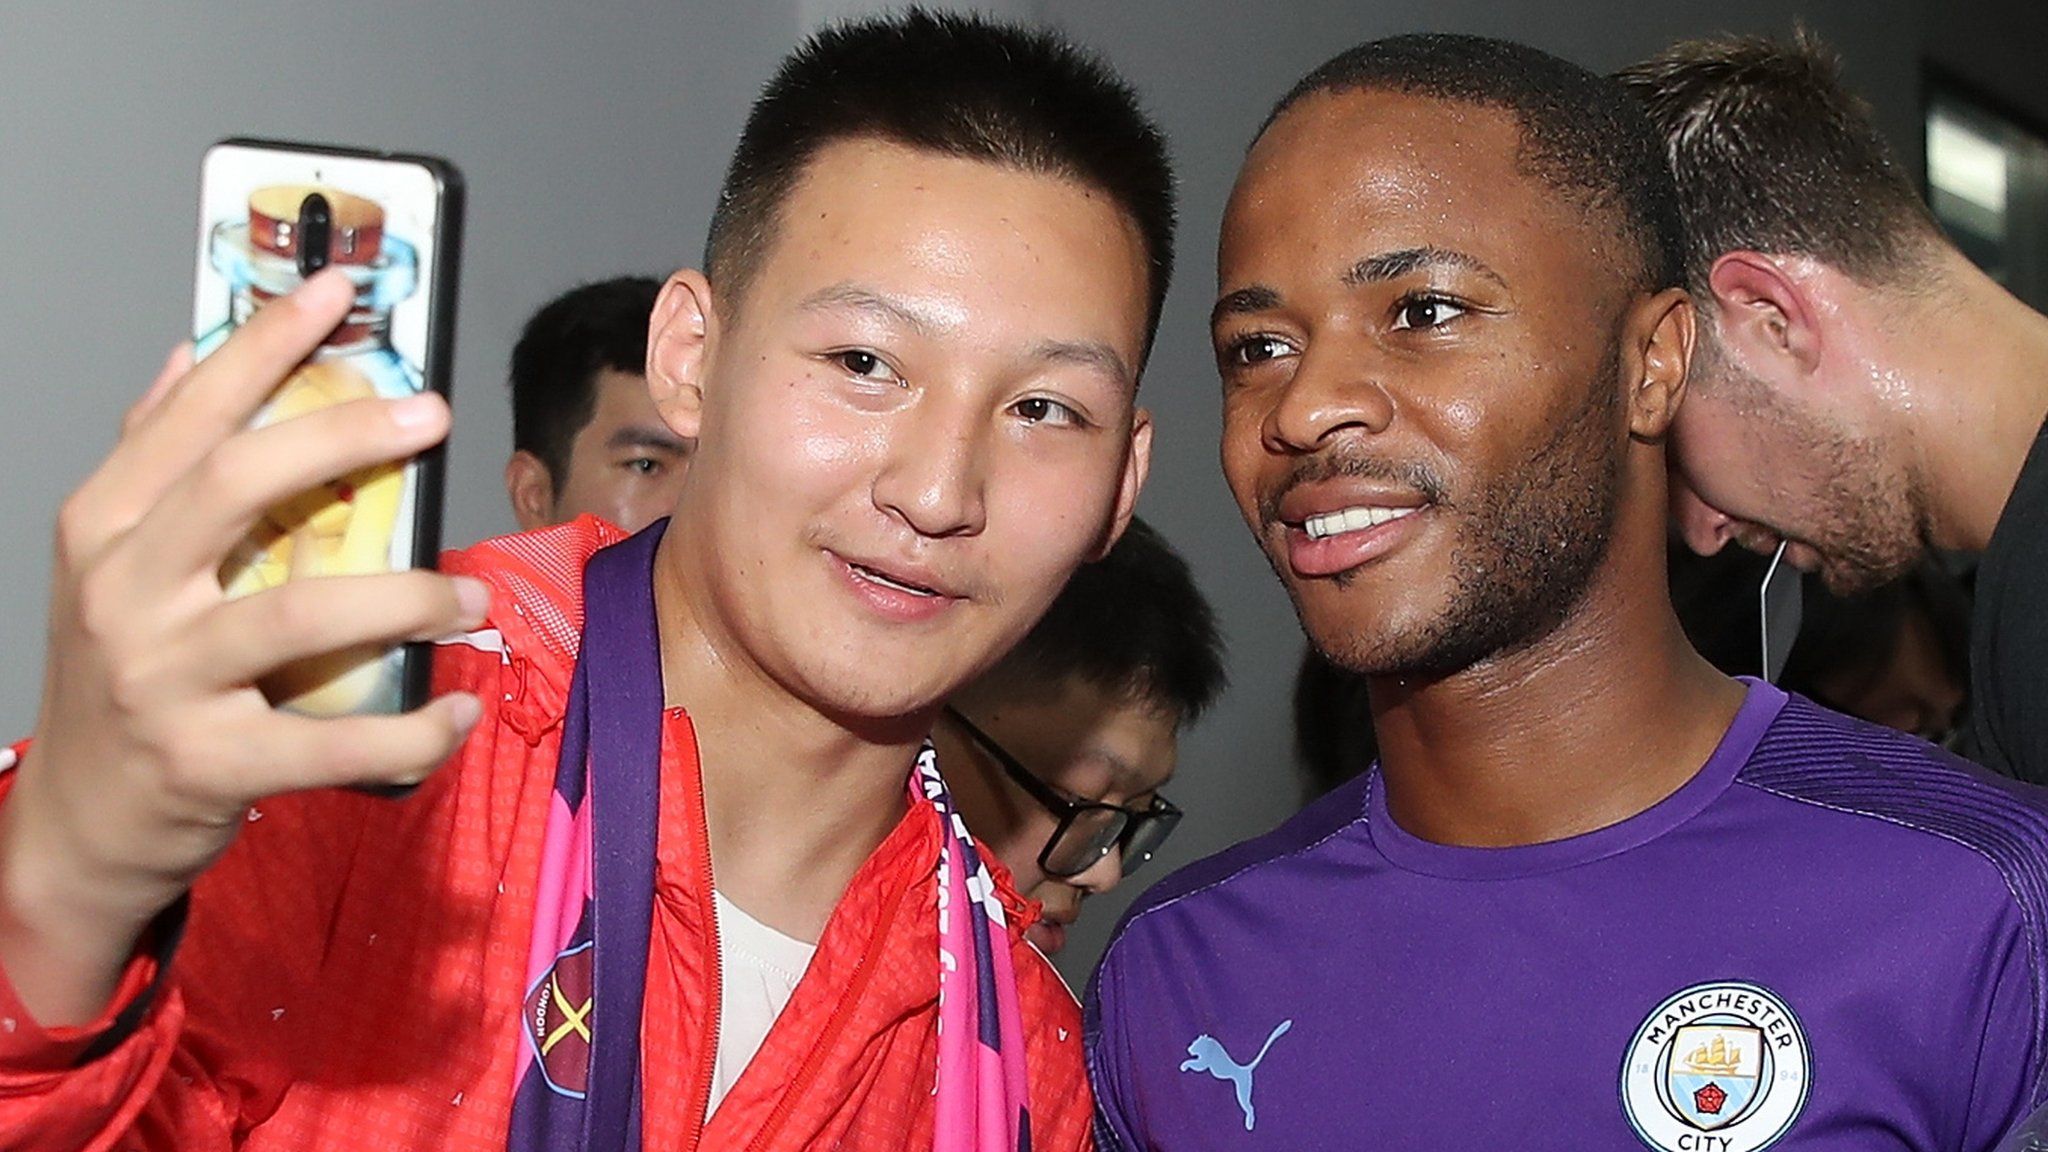 Raheem Sterling poses for a selfie with a fan in China